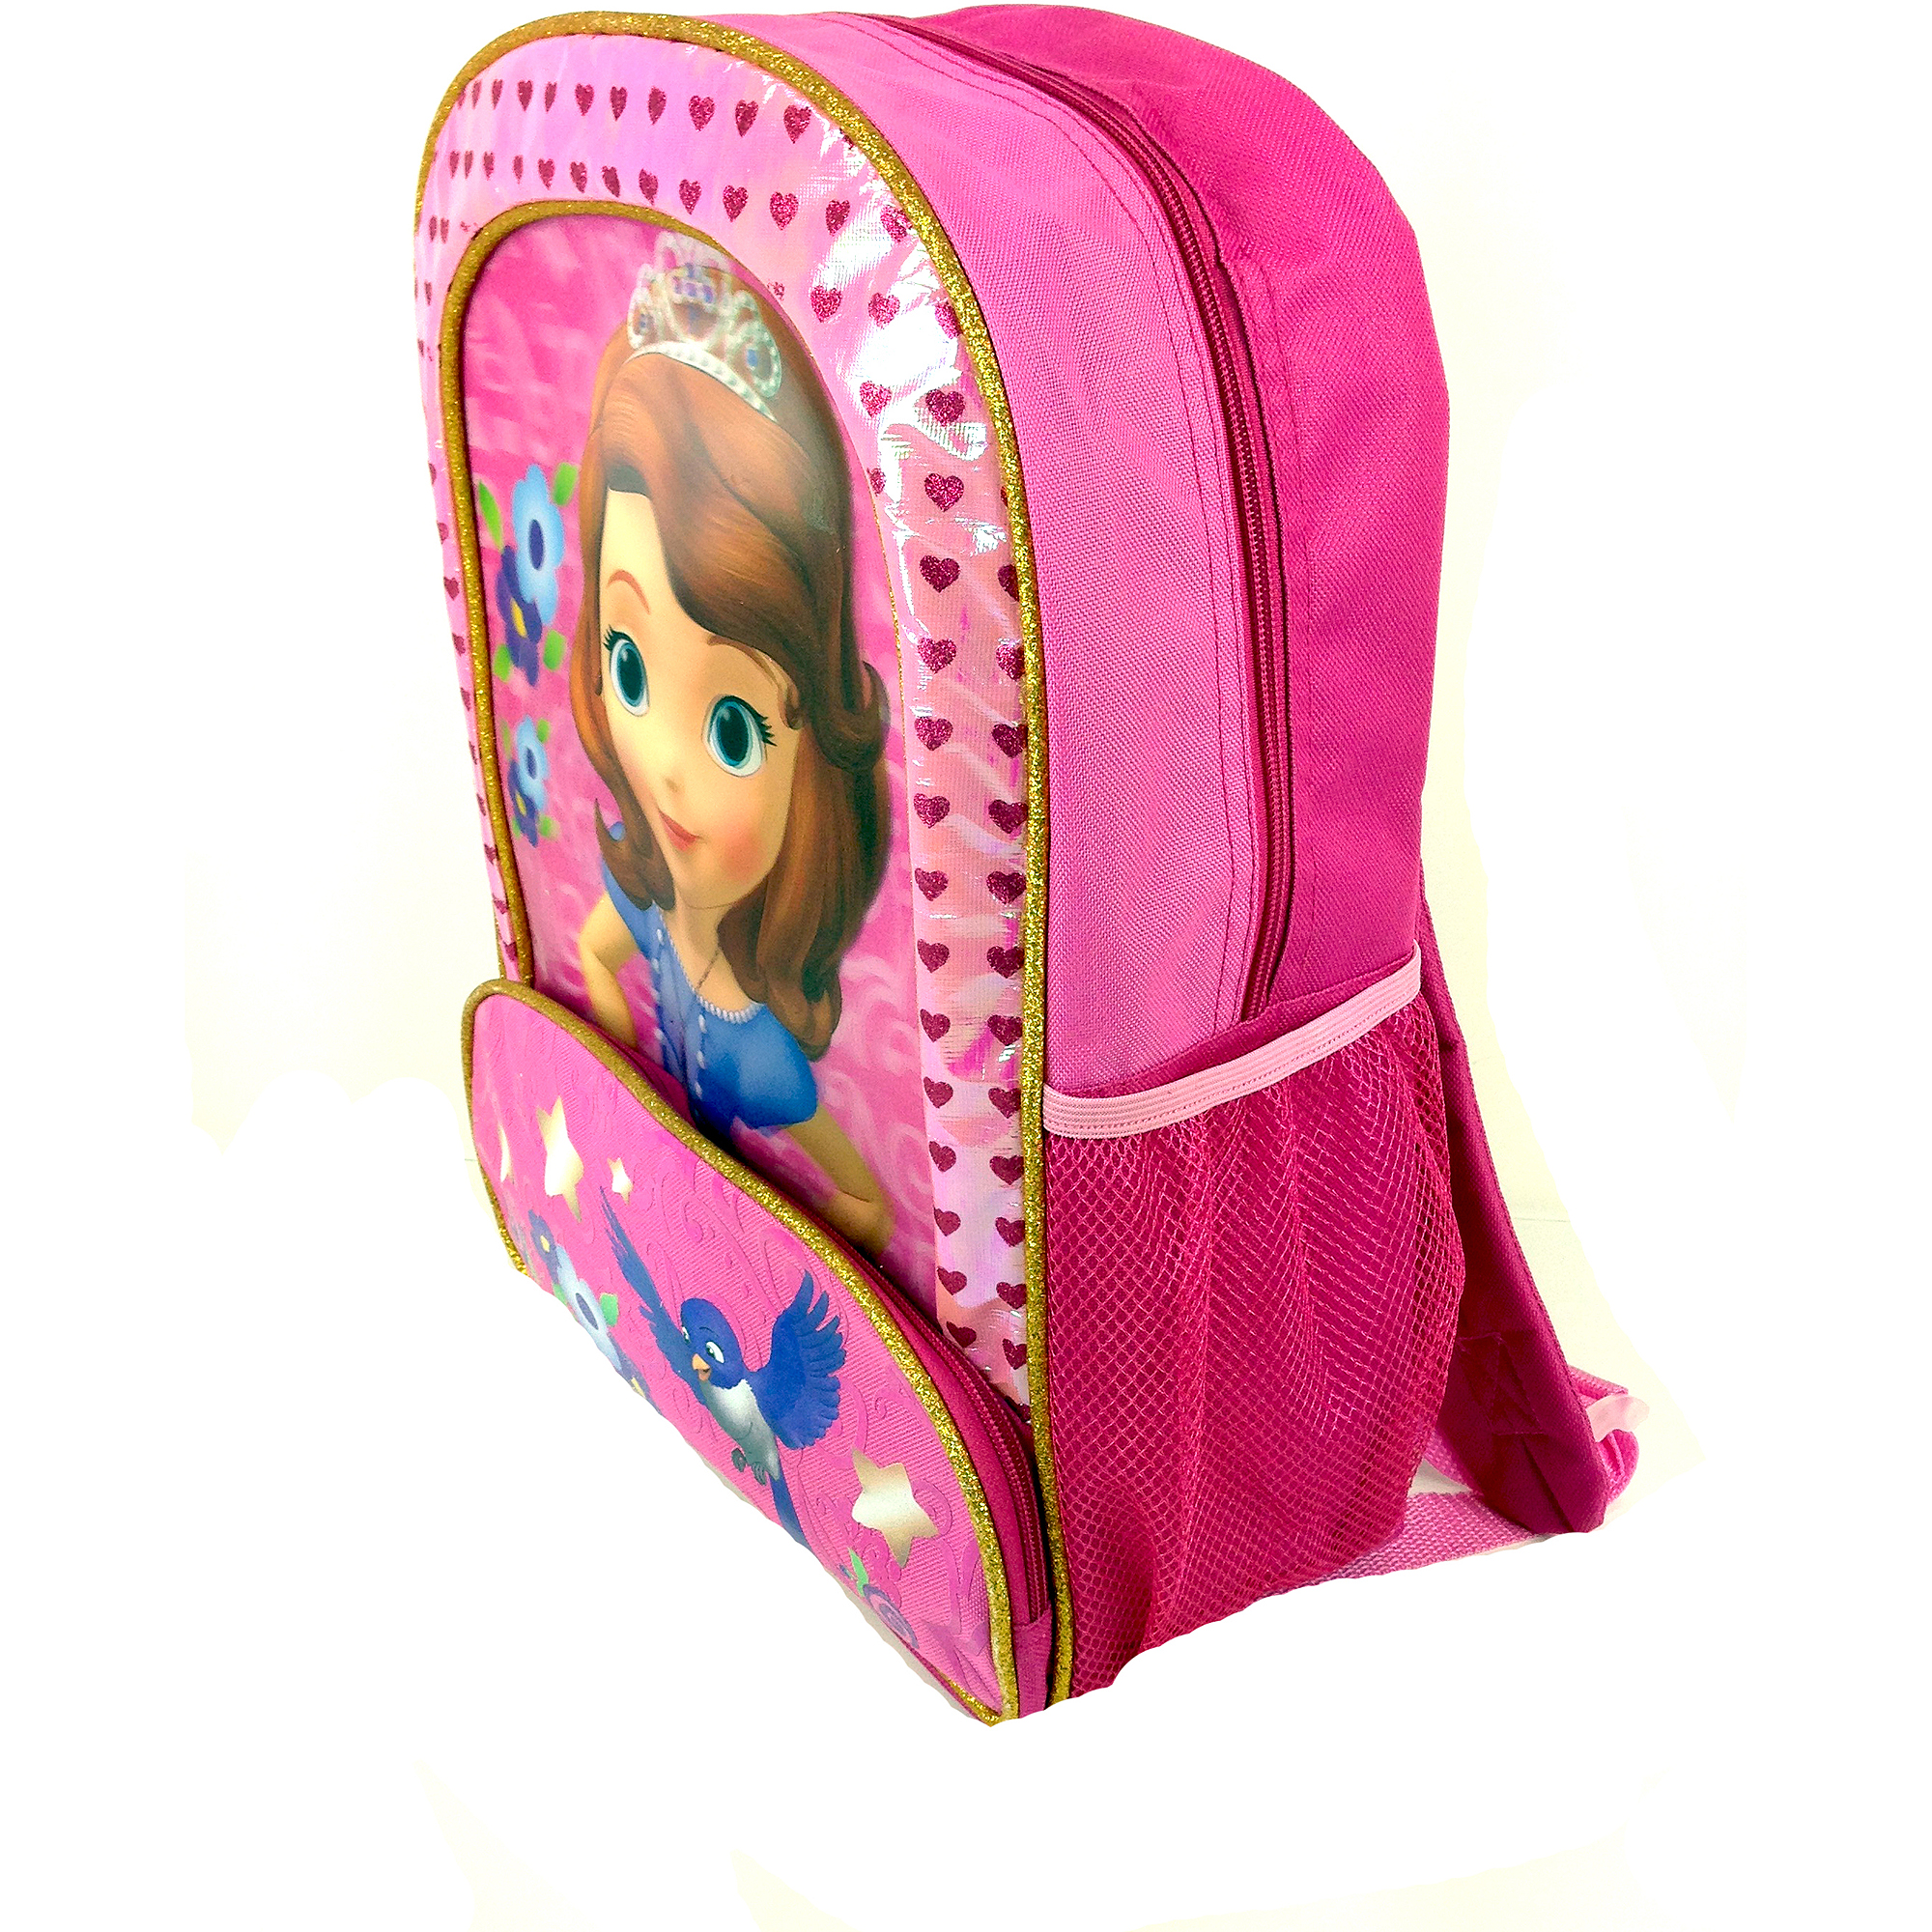 Disney Sofia The First 16" Girls' Pink Backpack - image 2 of 3